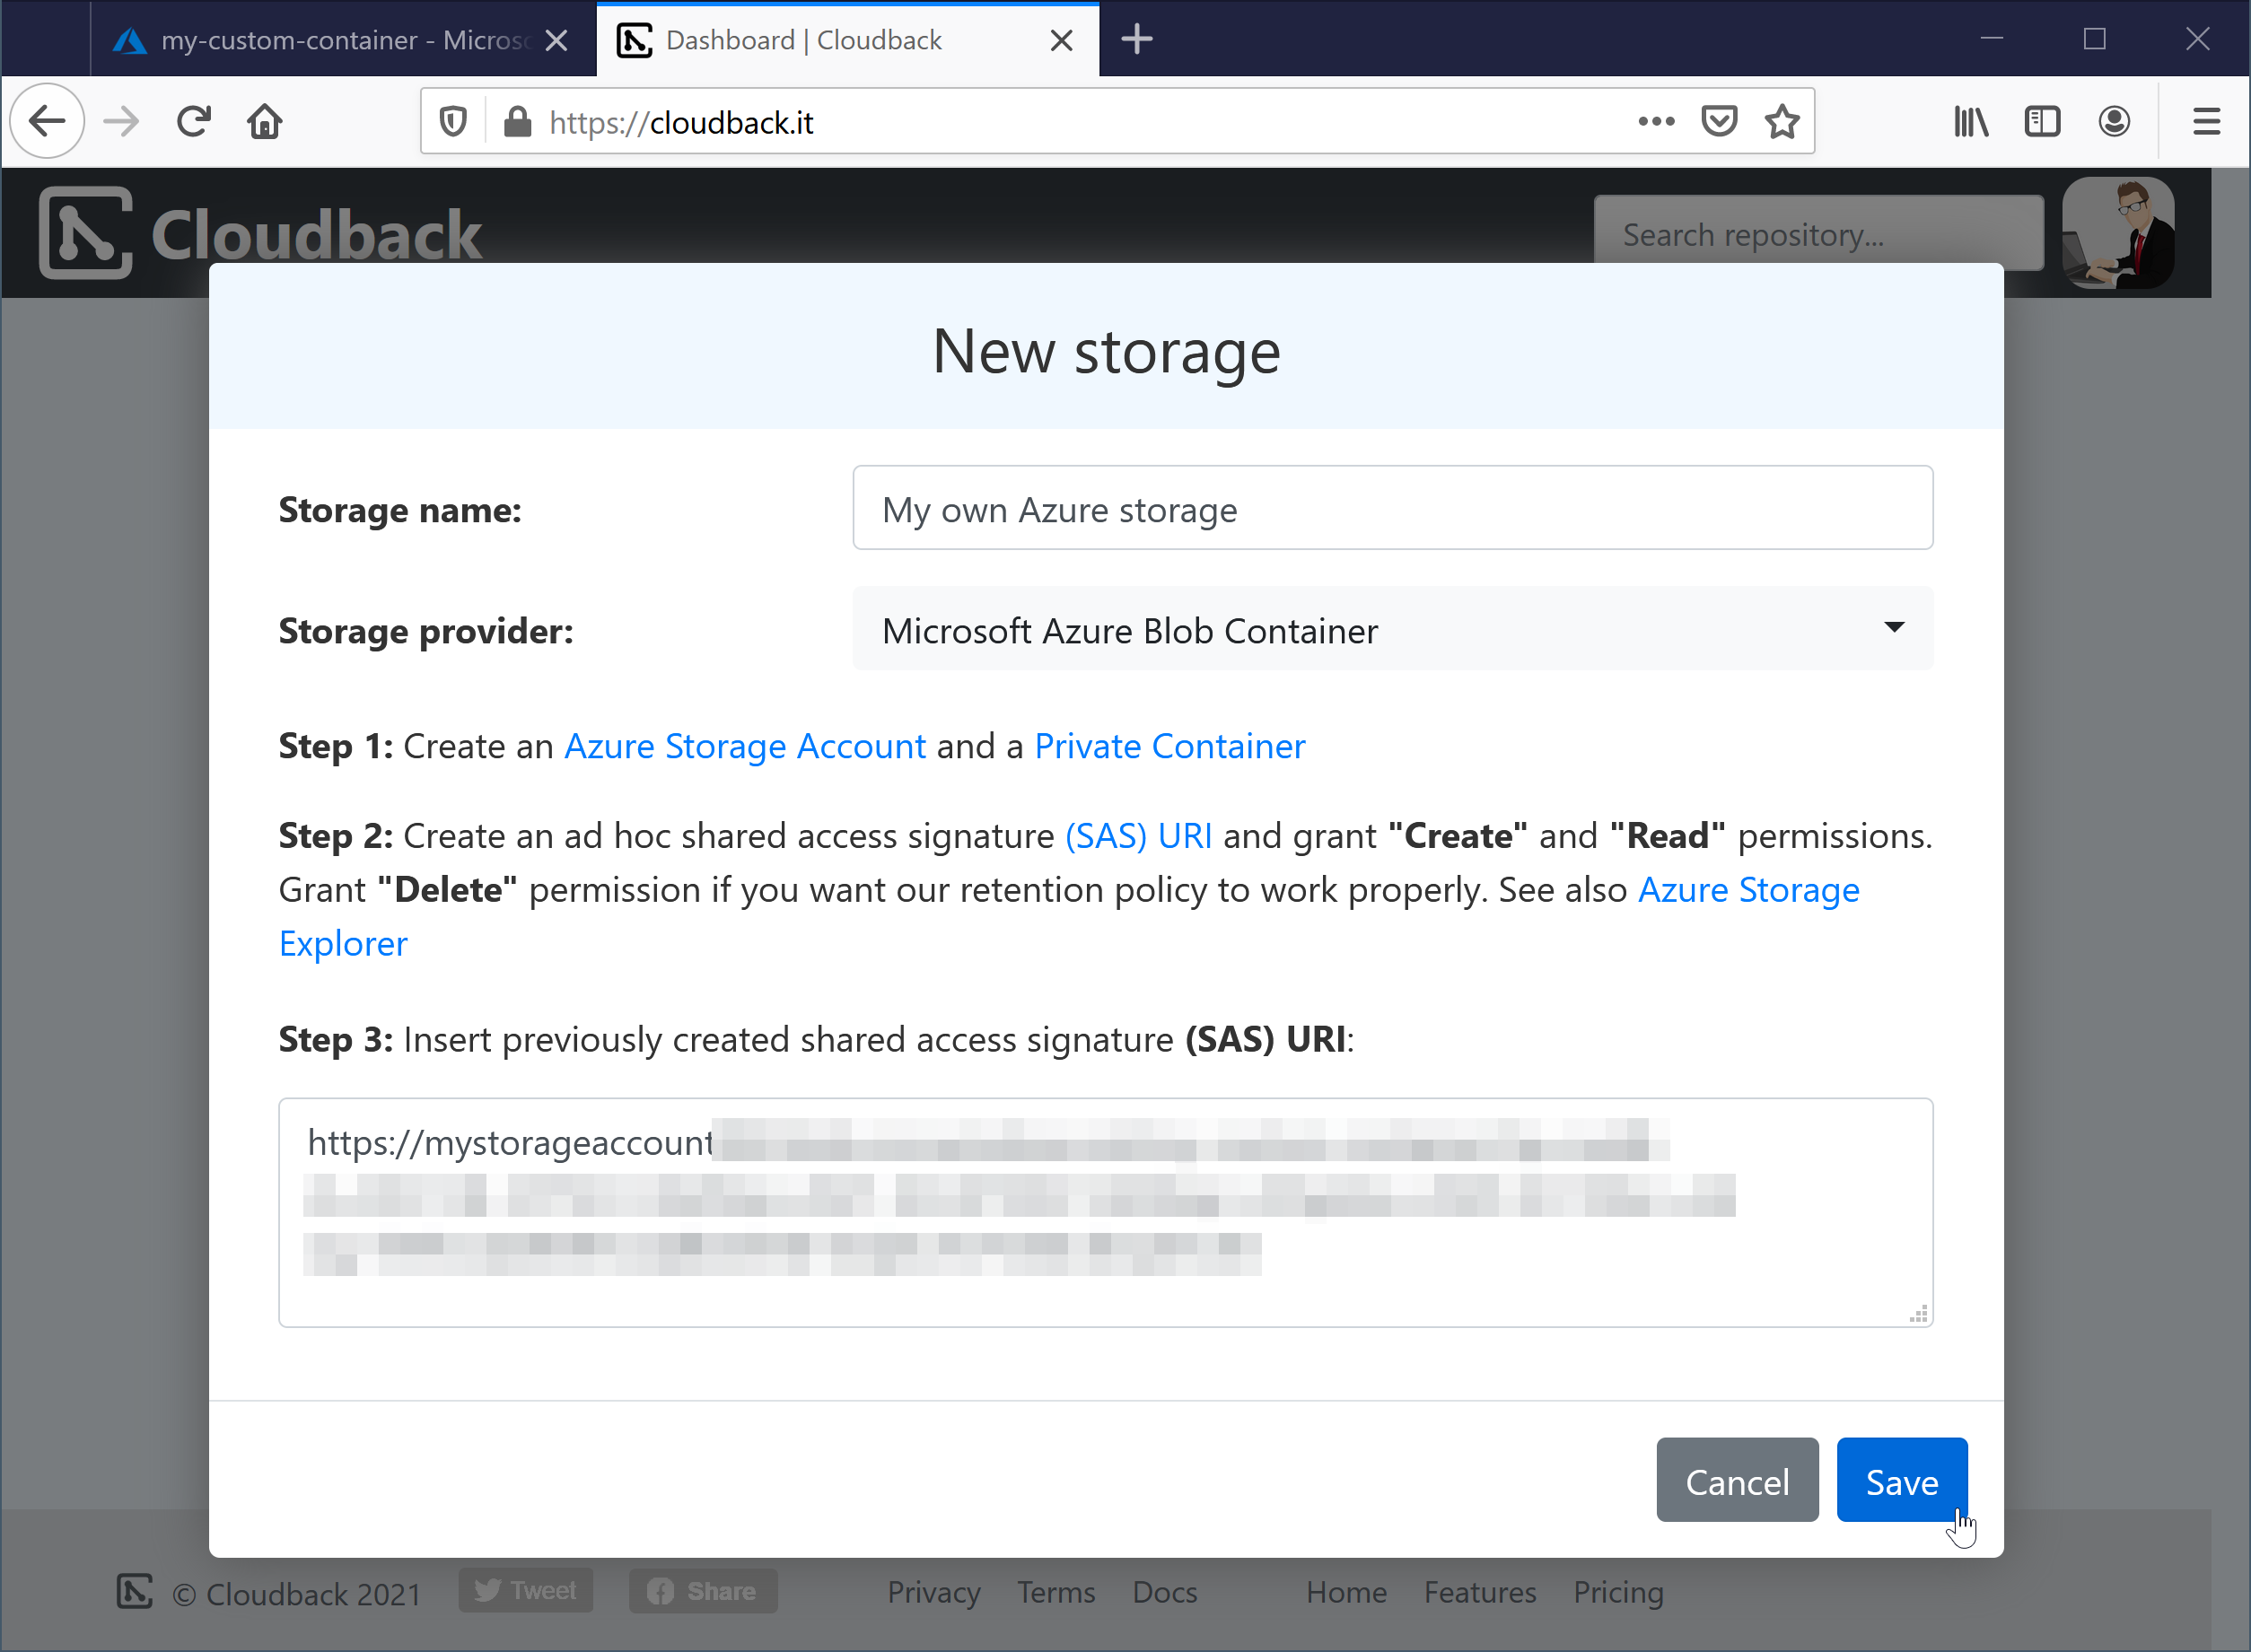 new storage details to backup GitHub repository